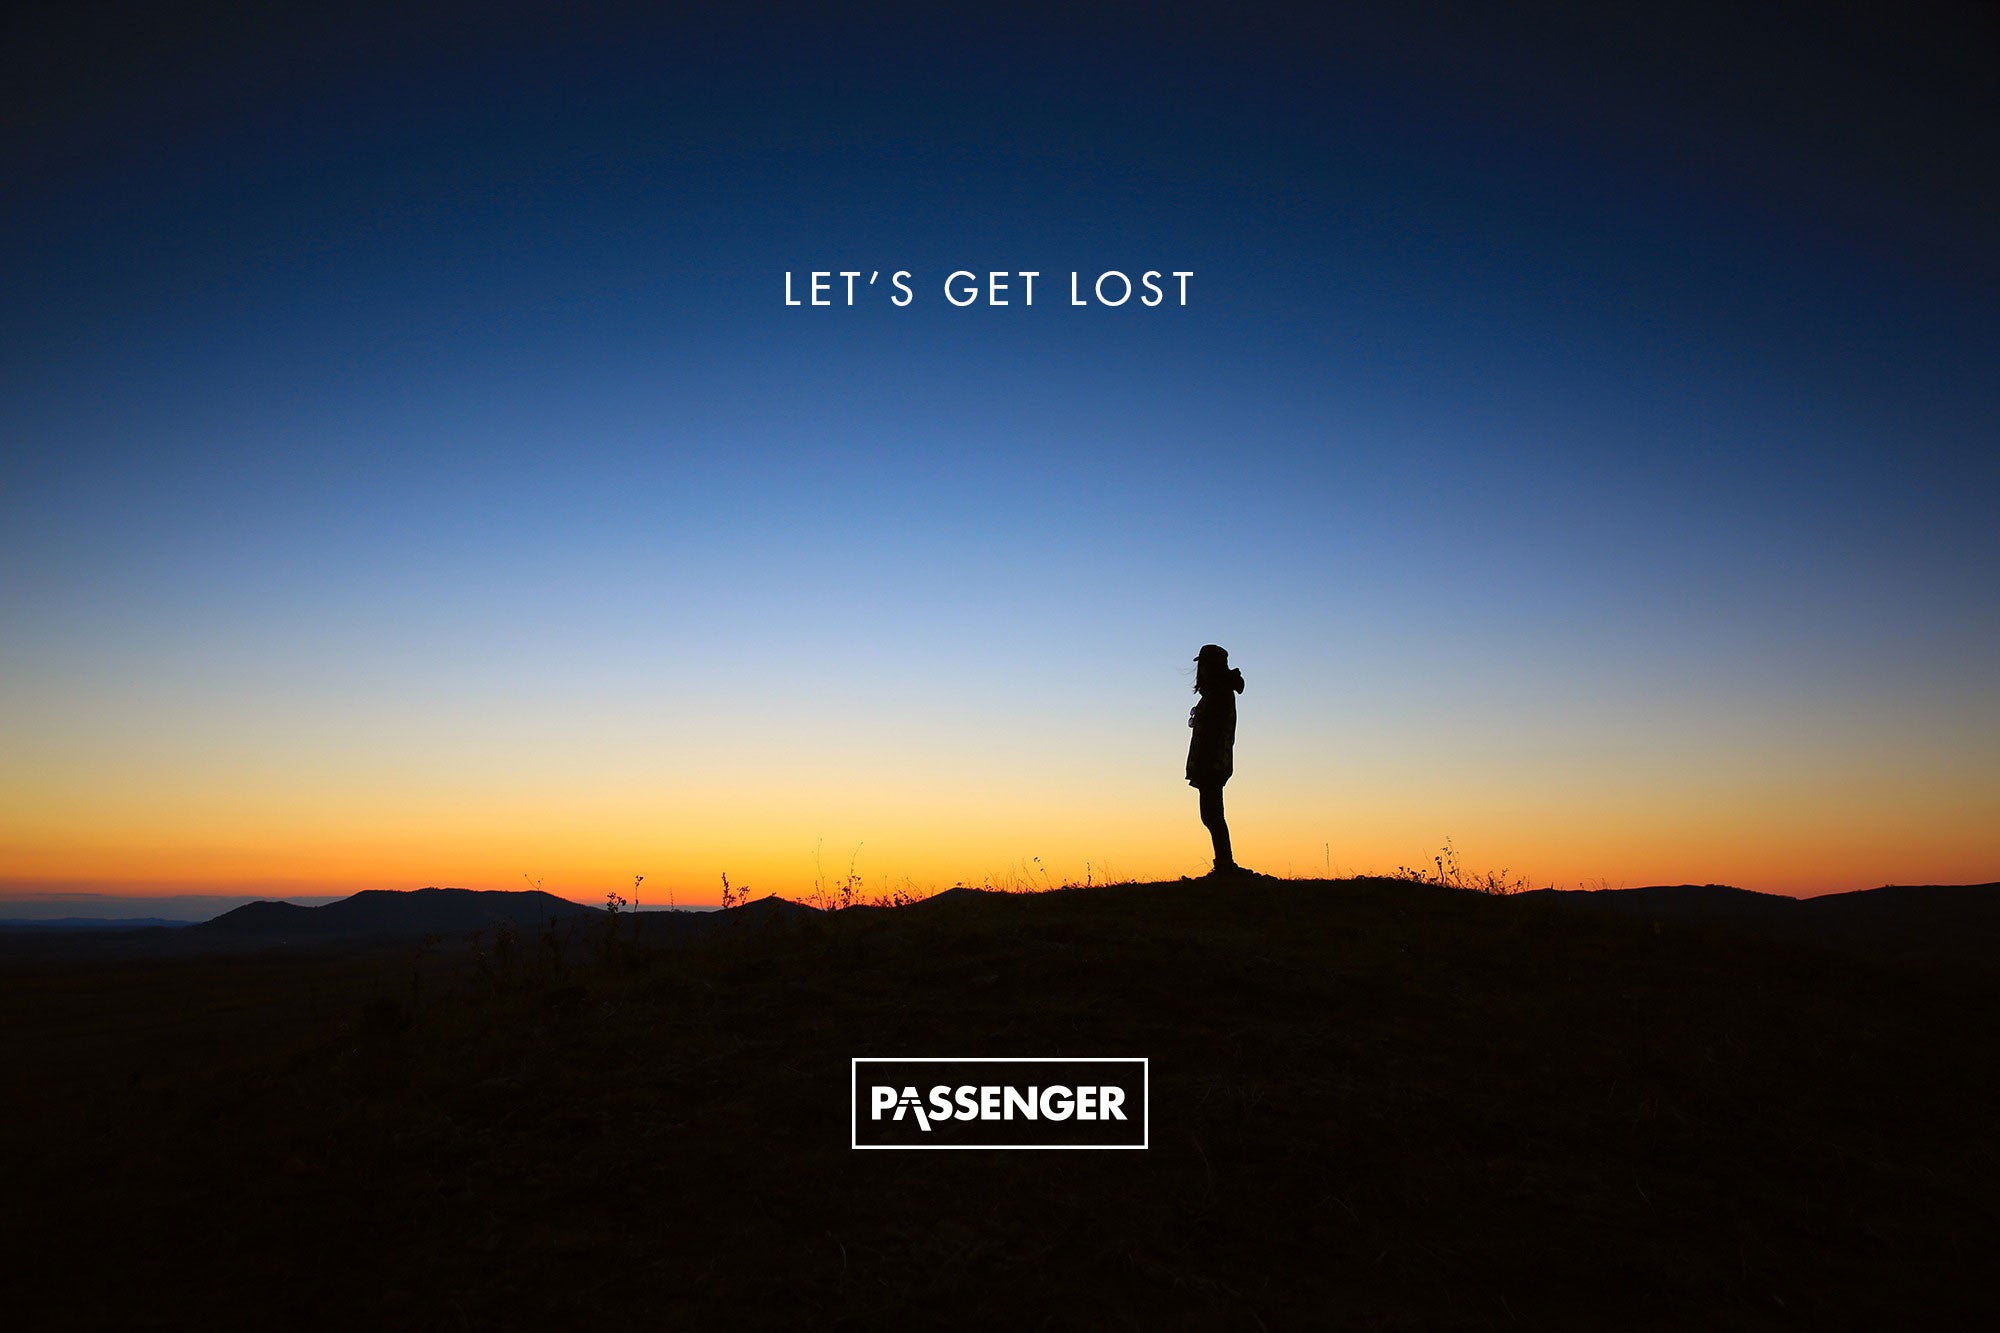 Passenger - Loose yourself.